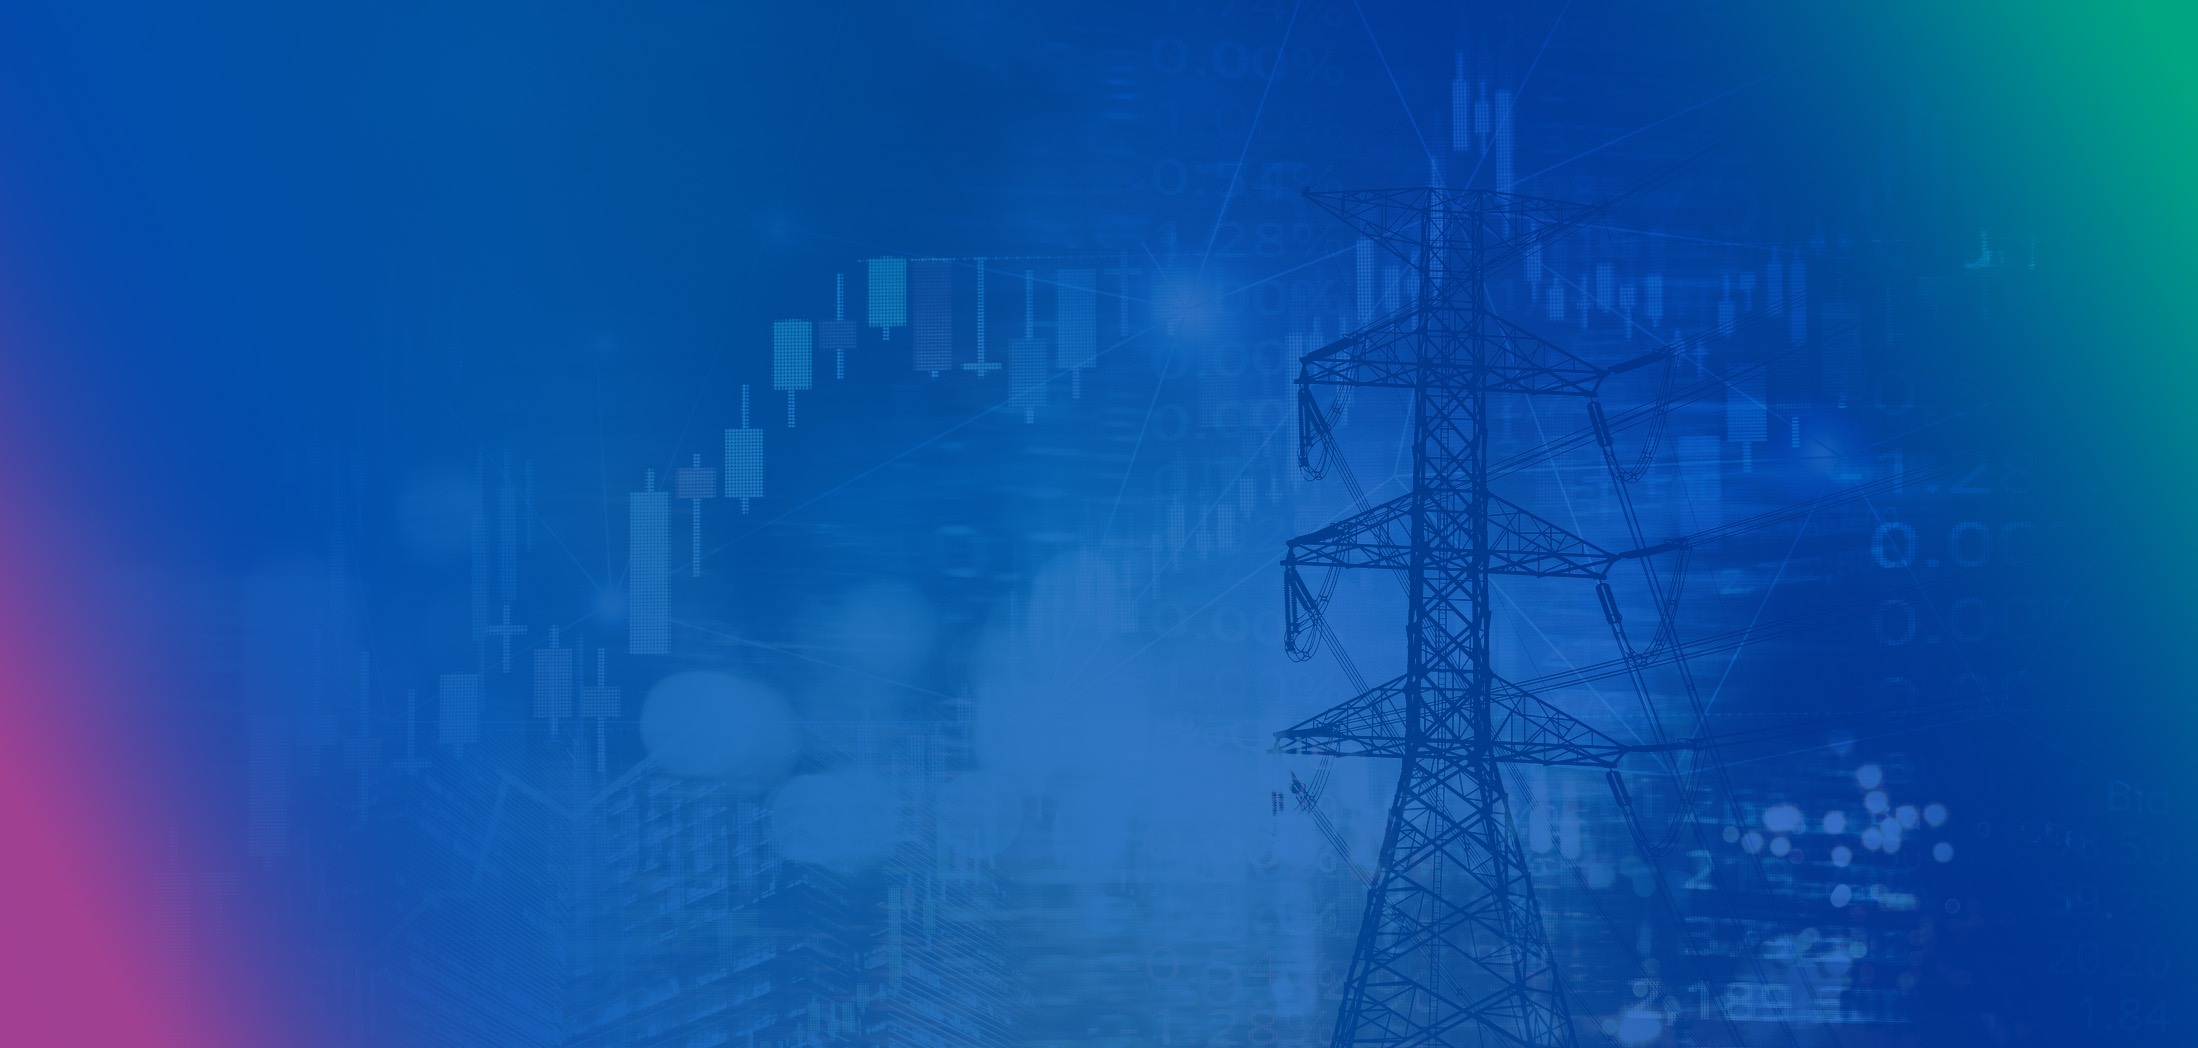 Market stock graph and information with city light and electricity and energy facility industry and business background